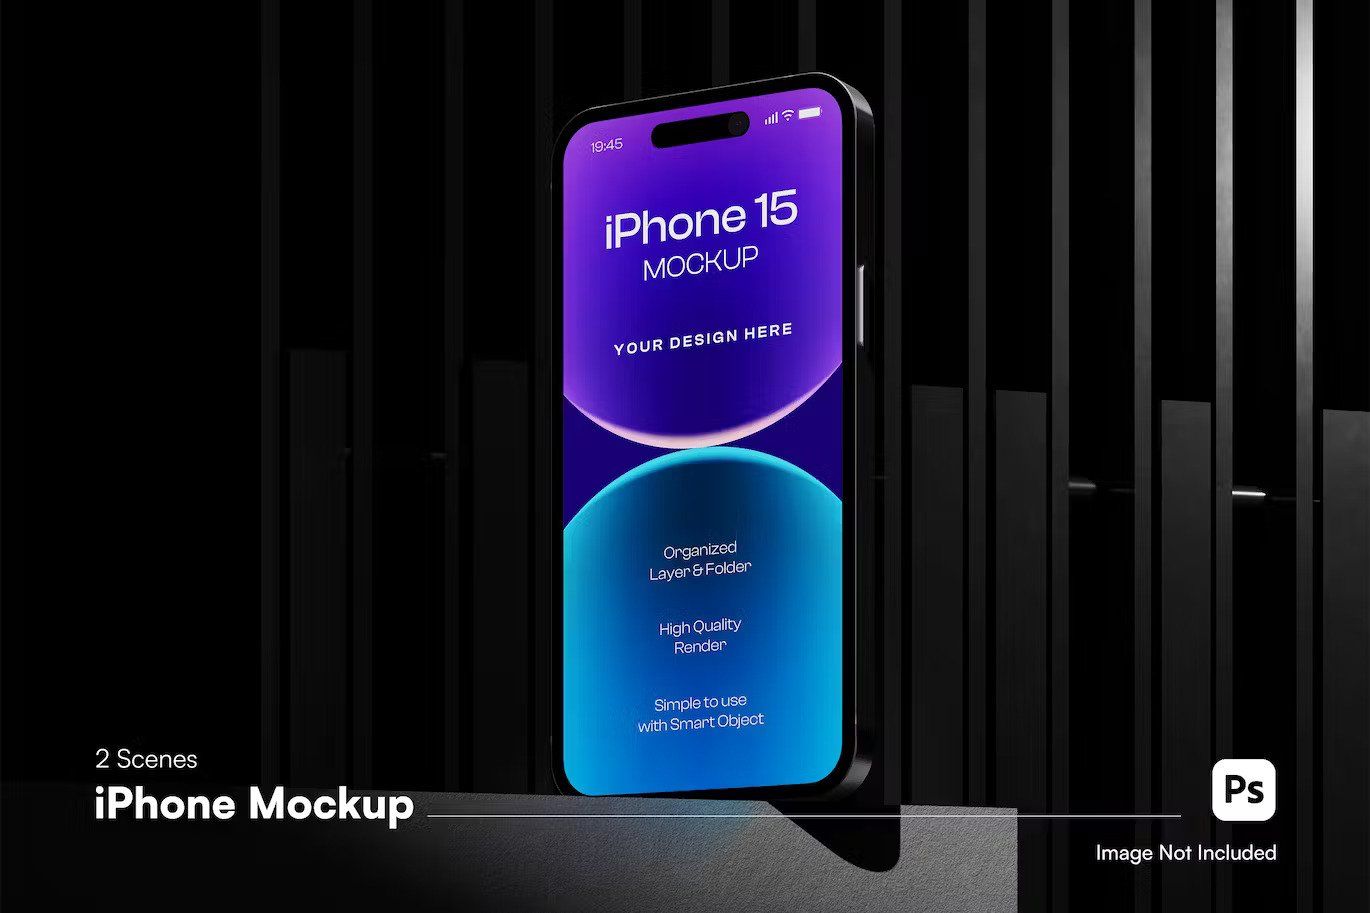 A standing iphone 15 mockup